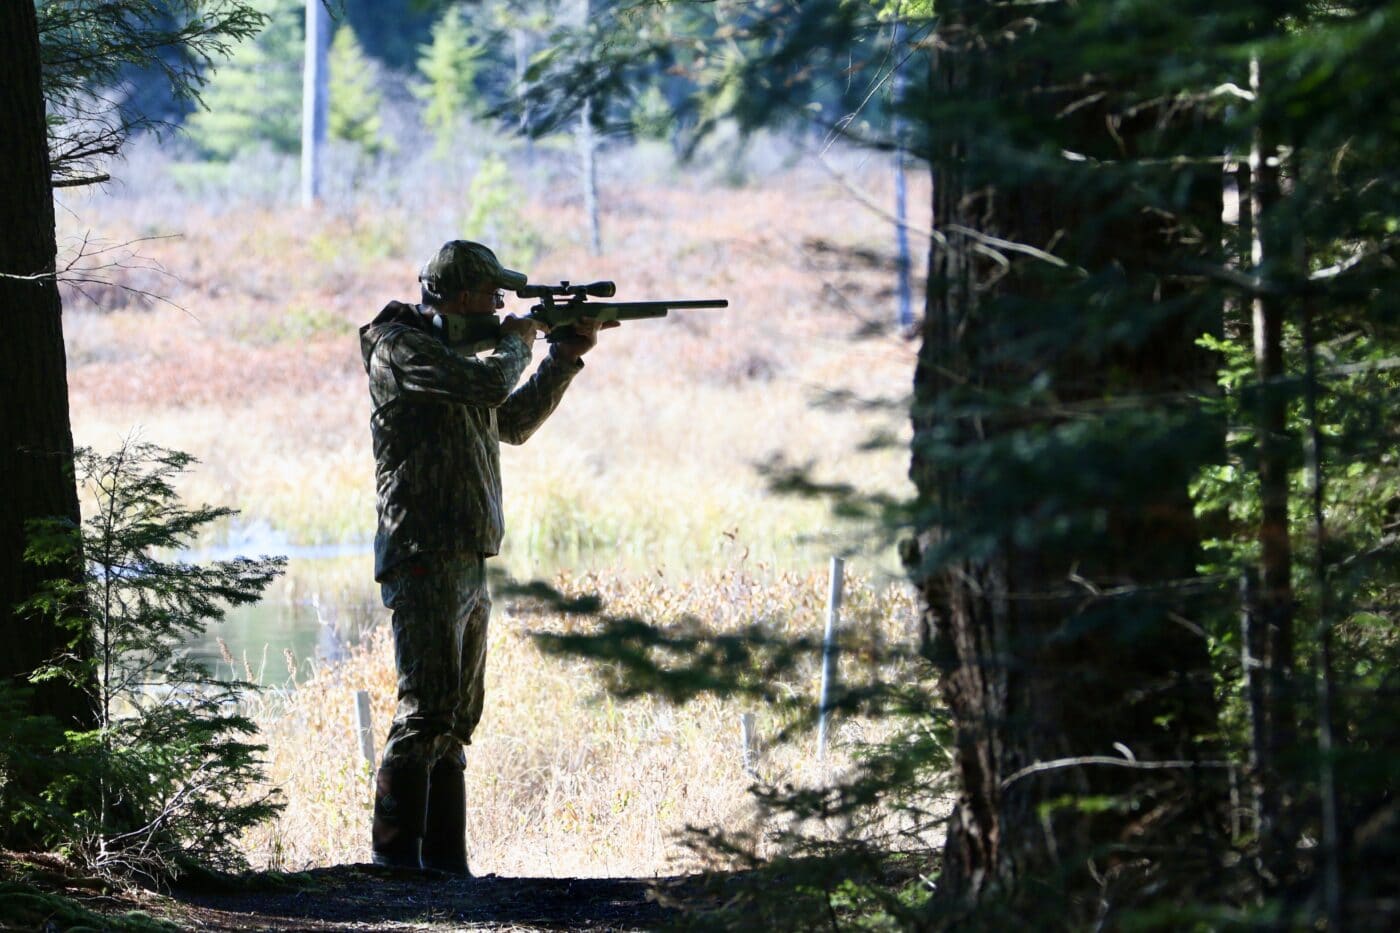 Man aiming rifle for maximum accuracy while in a forest hunting deer